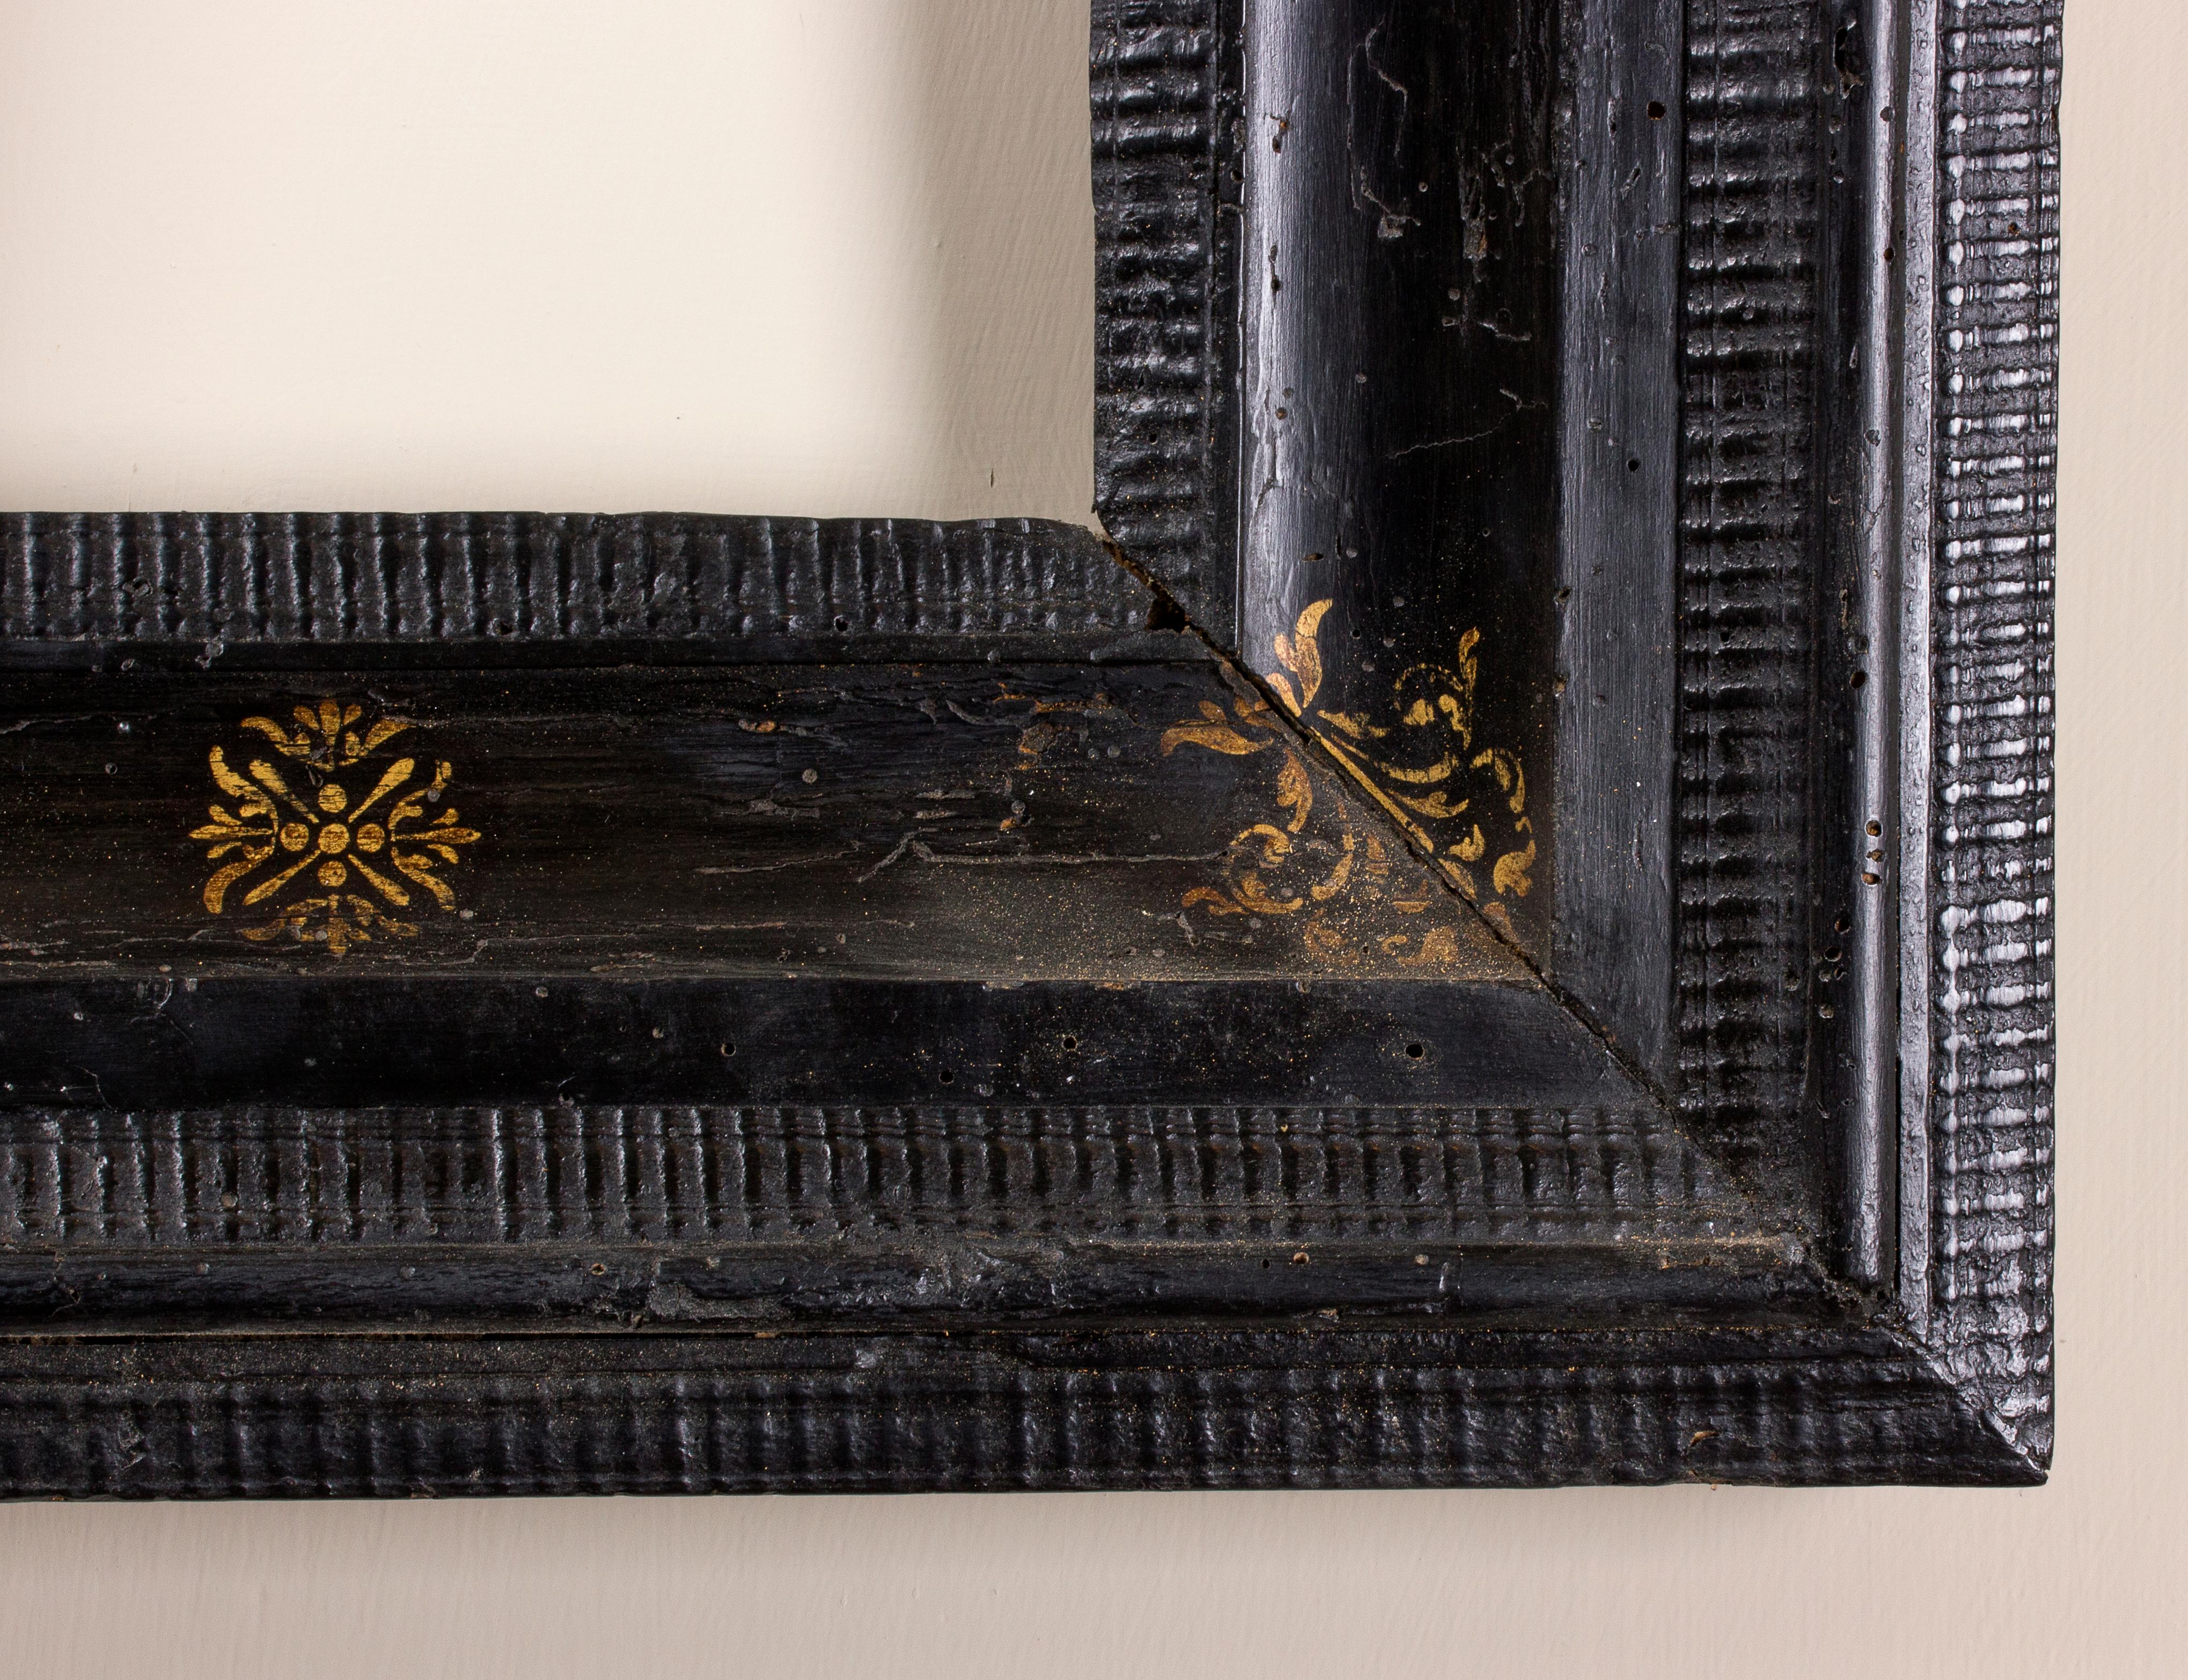 Guilloche frame, first quarter of the 17th century
Ebonized wood guilloche frame decorated with gilded arabesque
Inside: 29.2 x 20.2 cm; outside: 52 x 43.5 cm
Depth is the wide of the band.